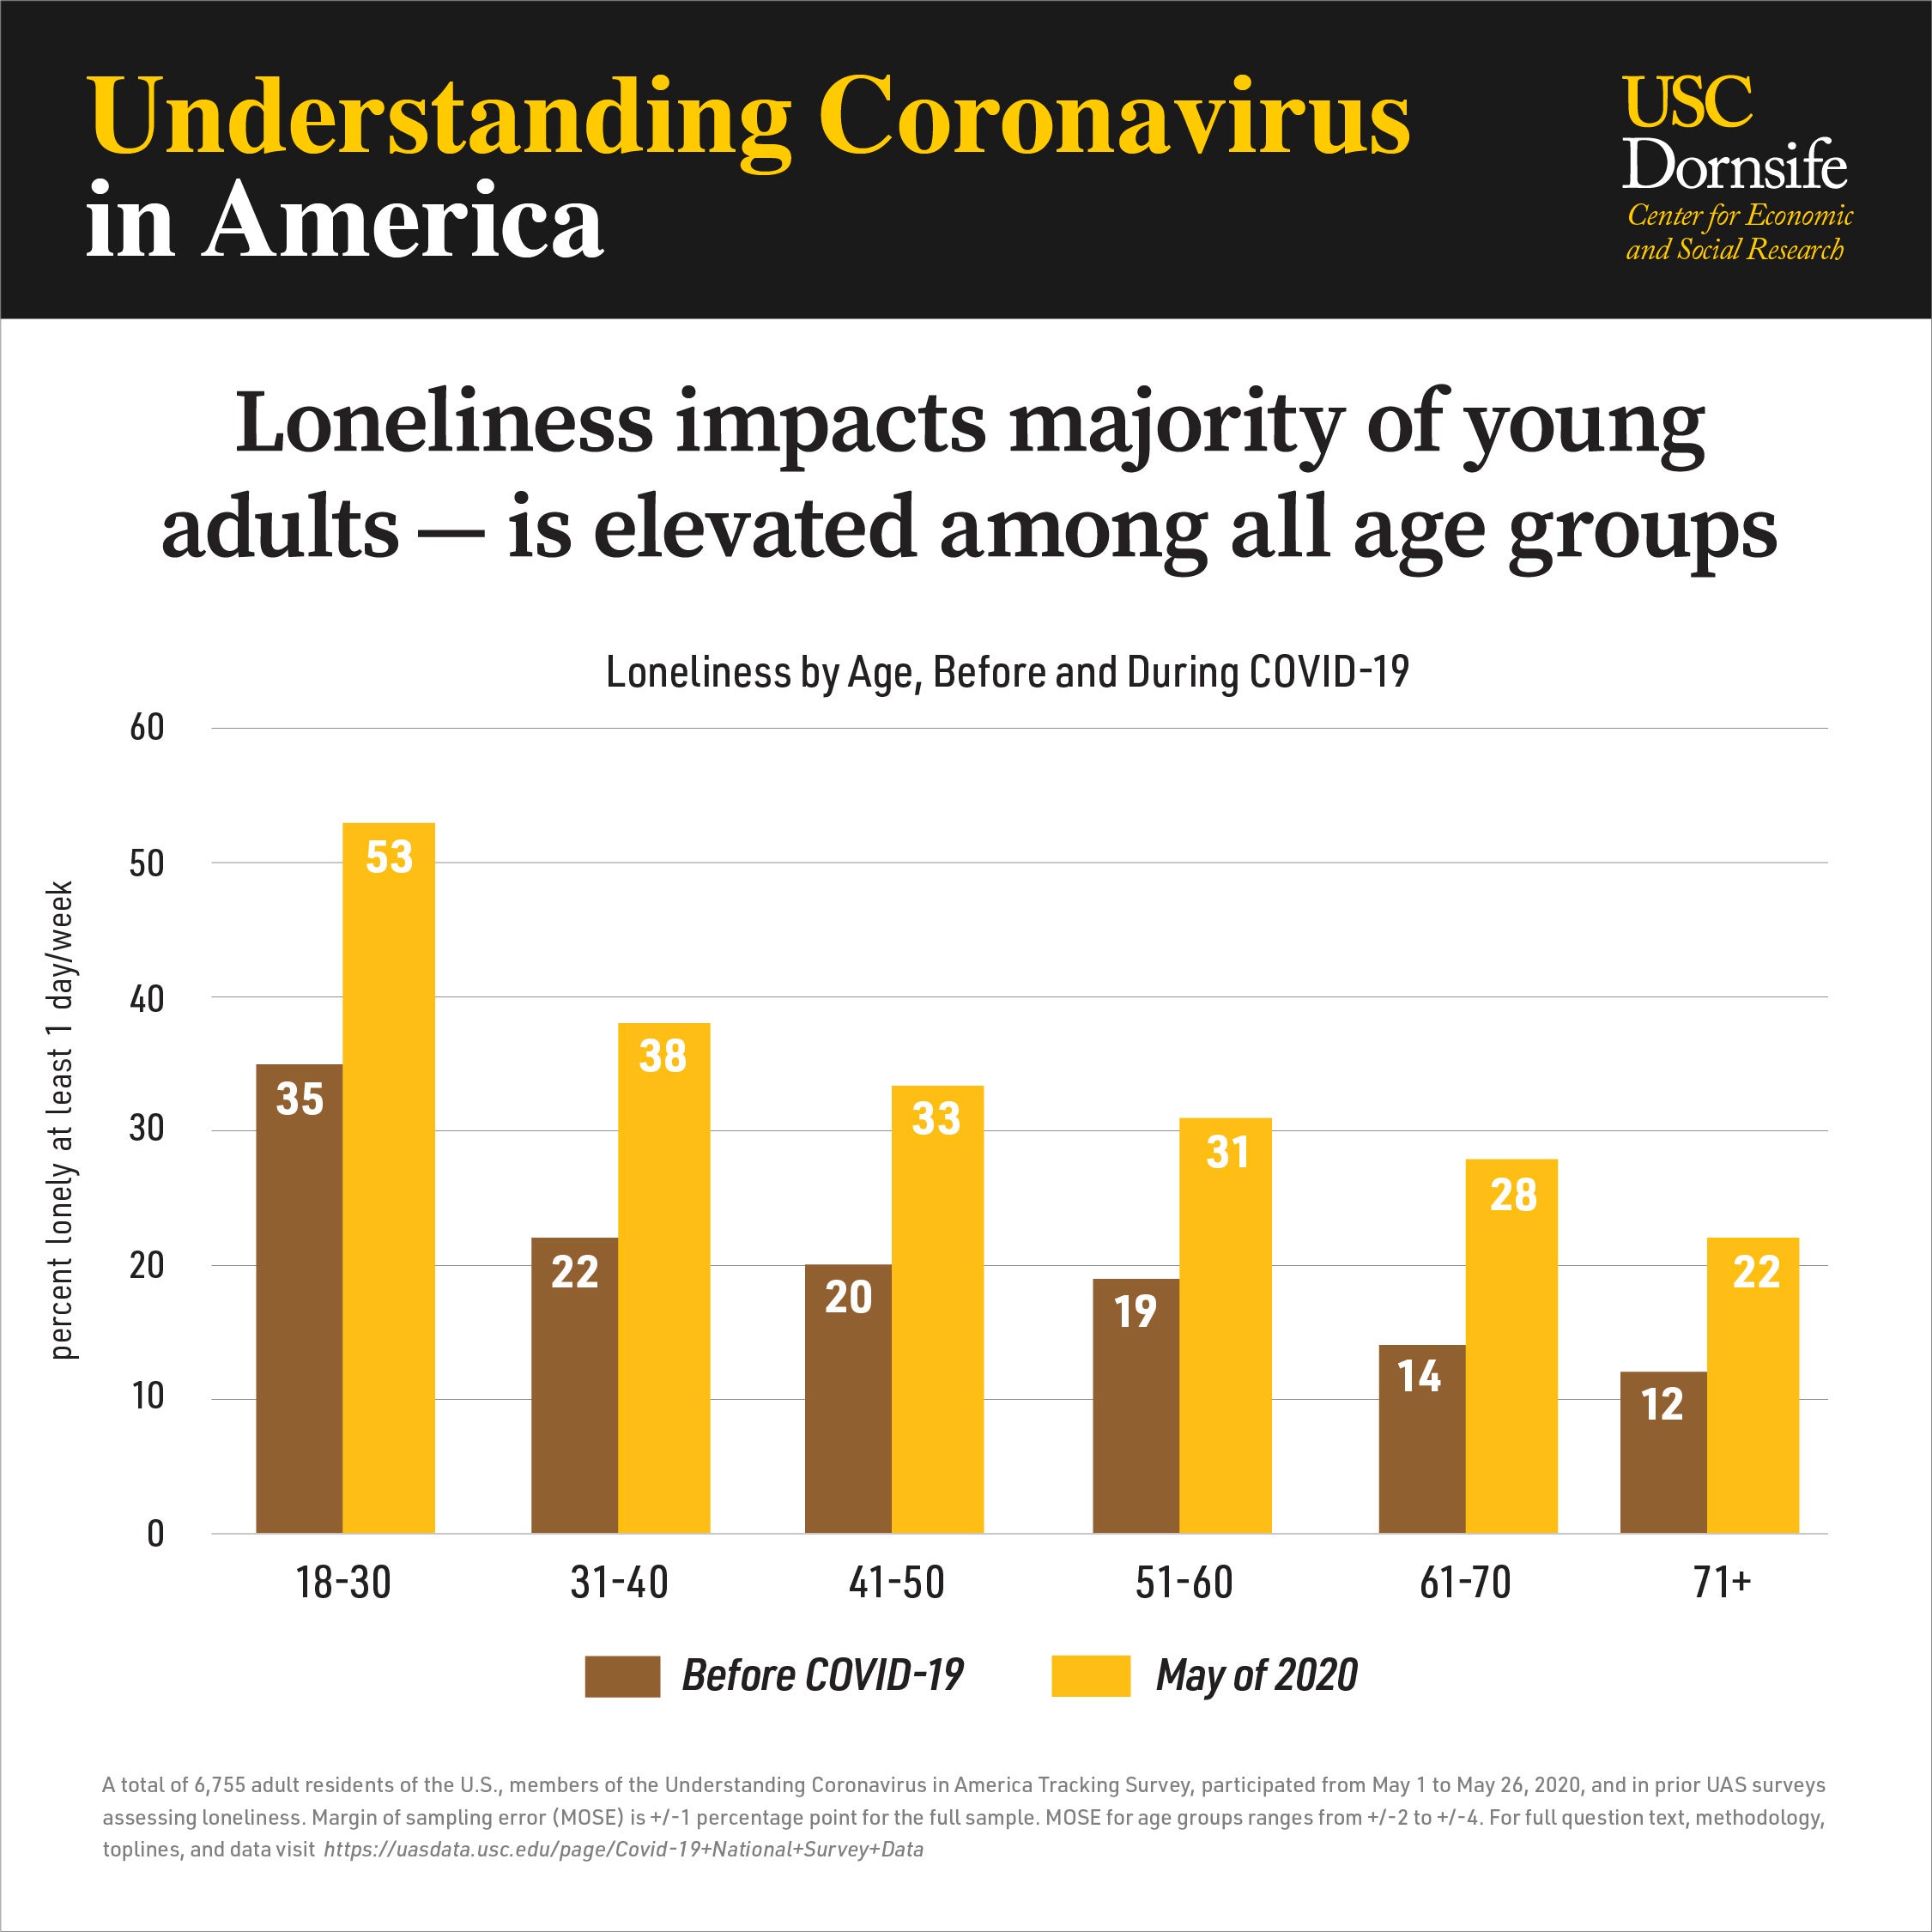 Bar graph comparing loneliness before COVID-19 and in May among different age groups. The trend indicates loneliness decreases with age.